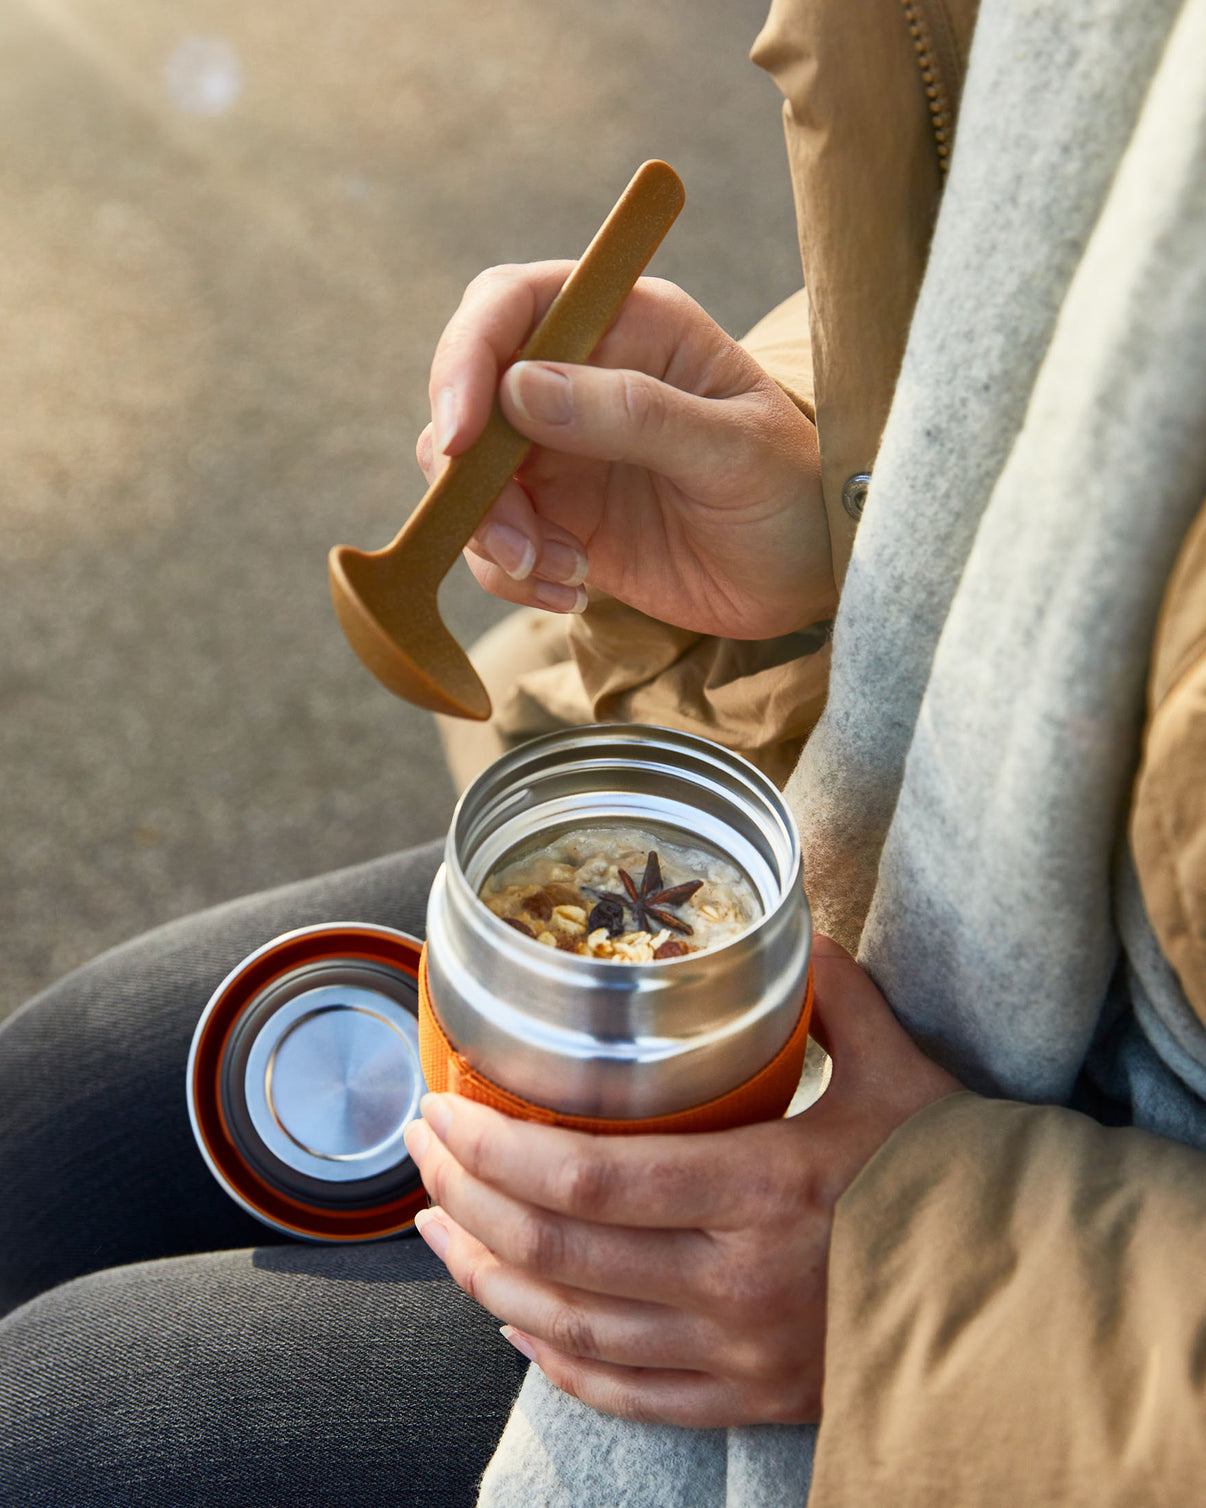 A Thermos that'll make it easy to tote soup or other liquid meals